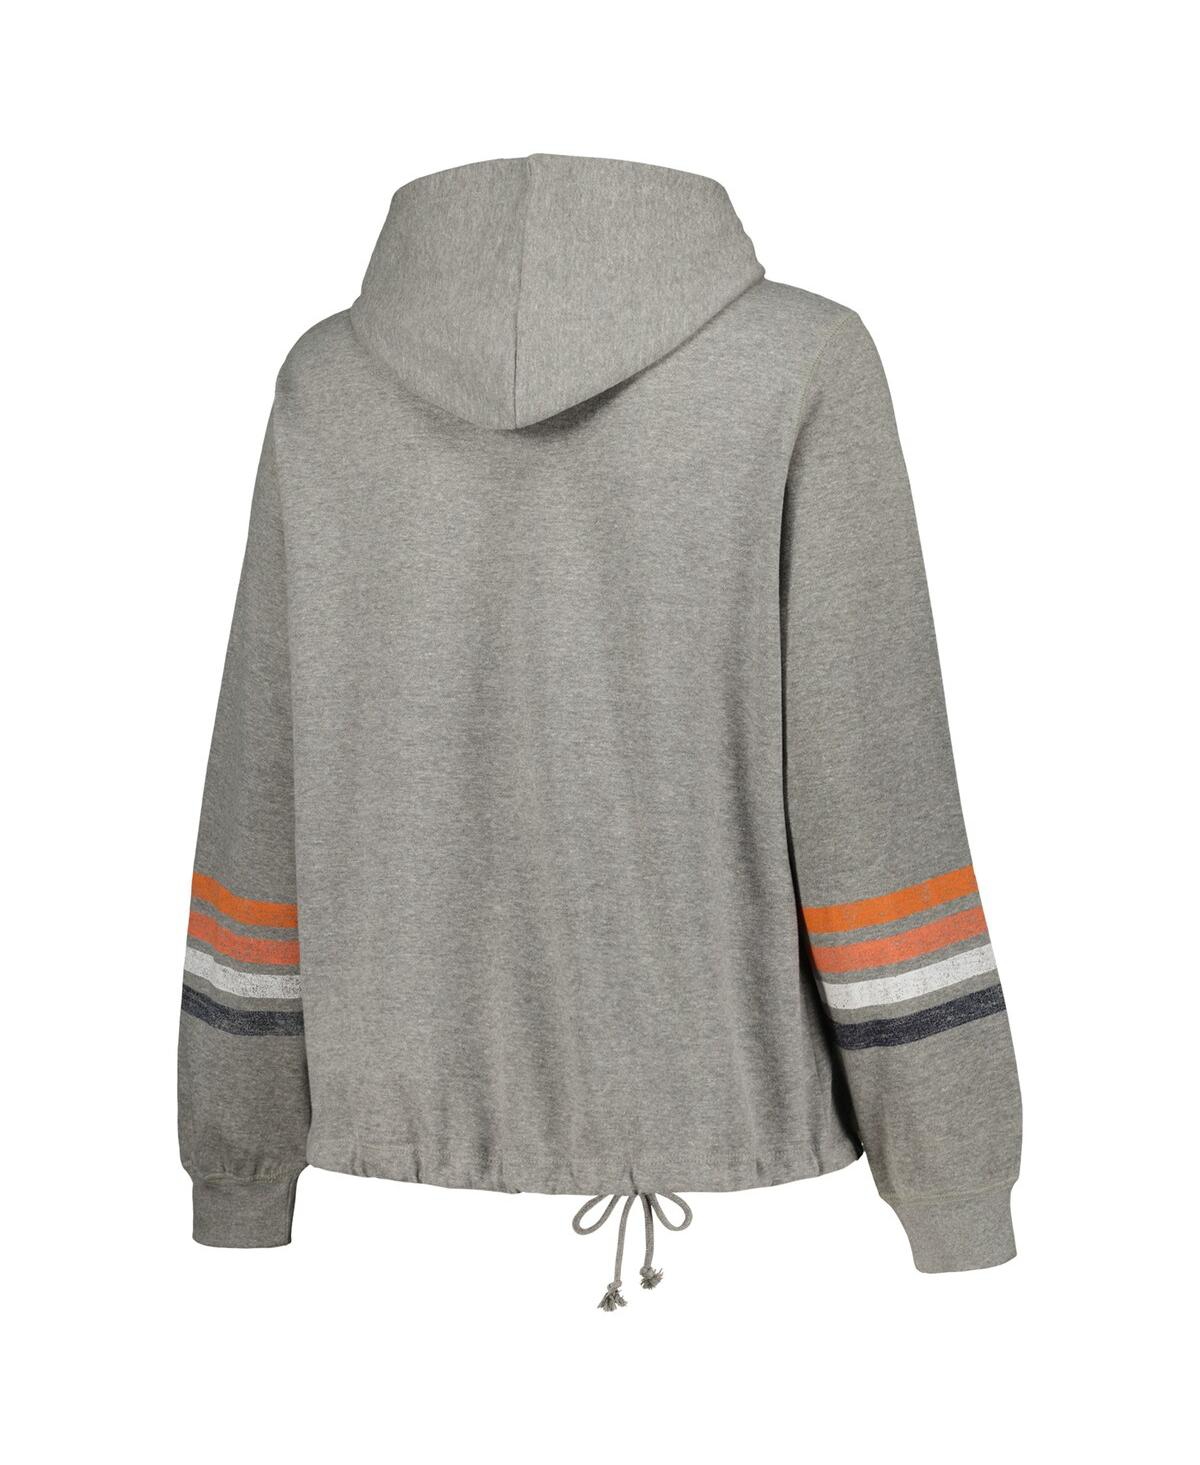 Shop 47 Brand Women's ' Heather Gray Distressed Chicago Bears Plus Size Upland Bennett Pullover Hoodie